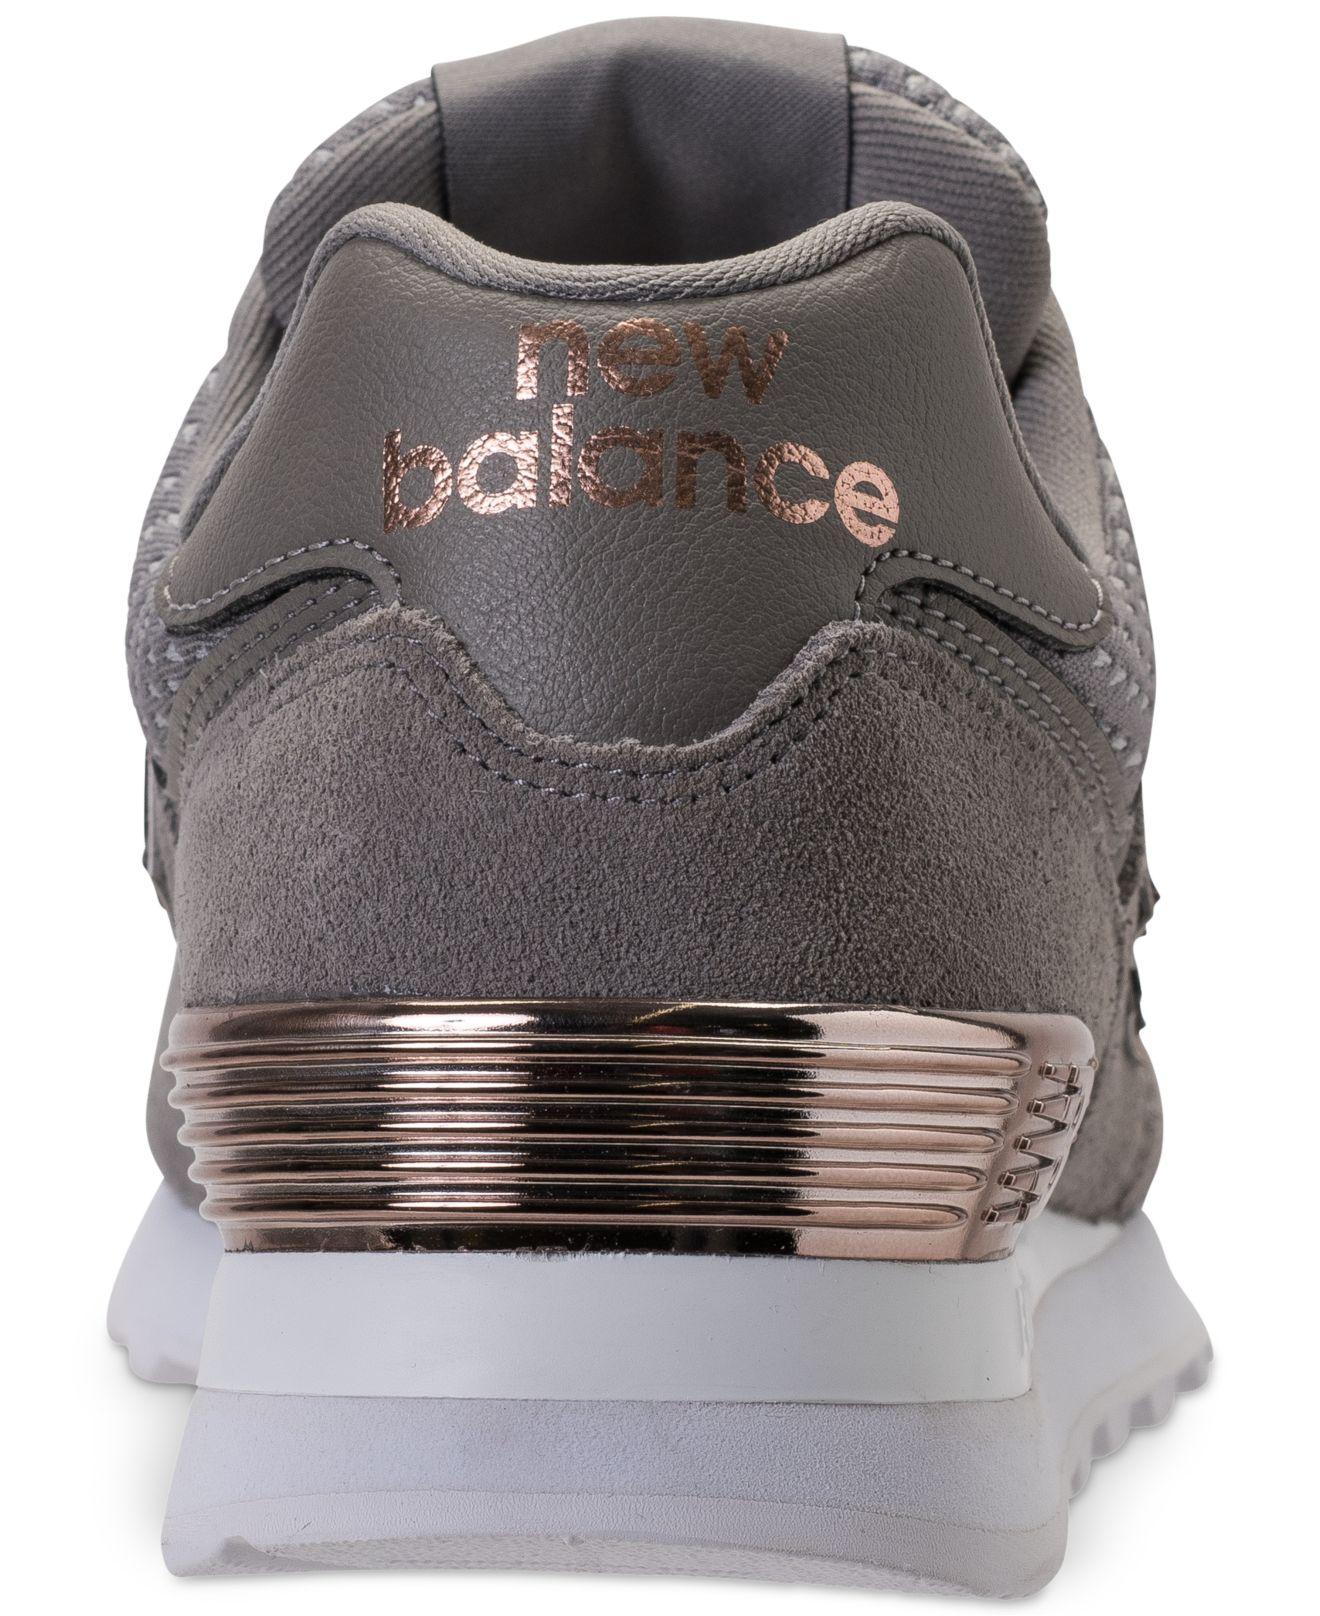 women's 574 rose gold casual sneakers from finish line